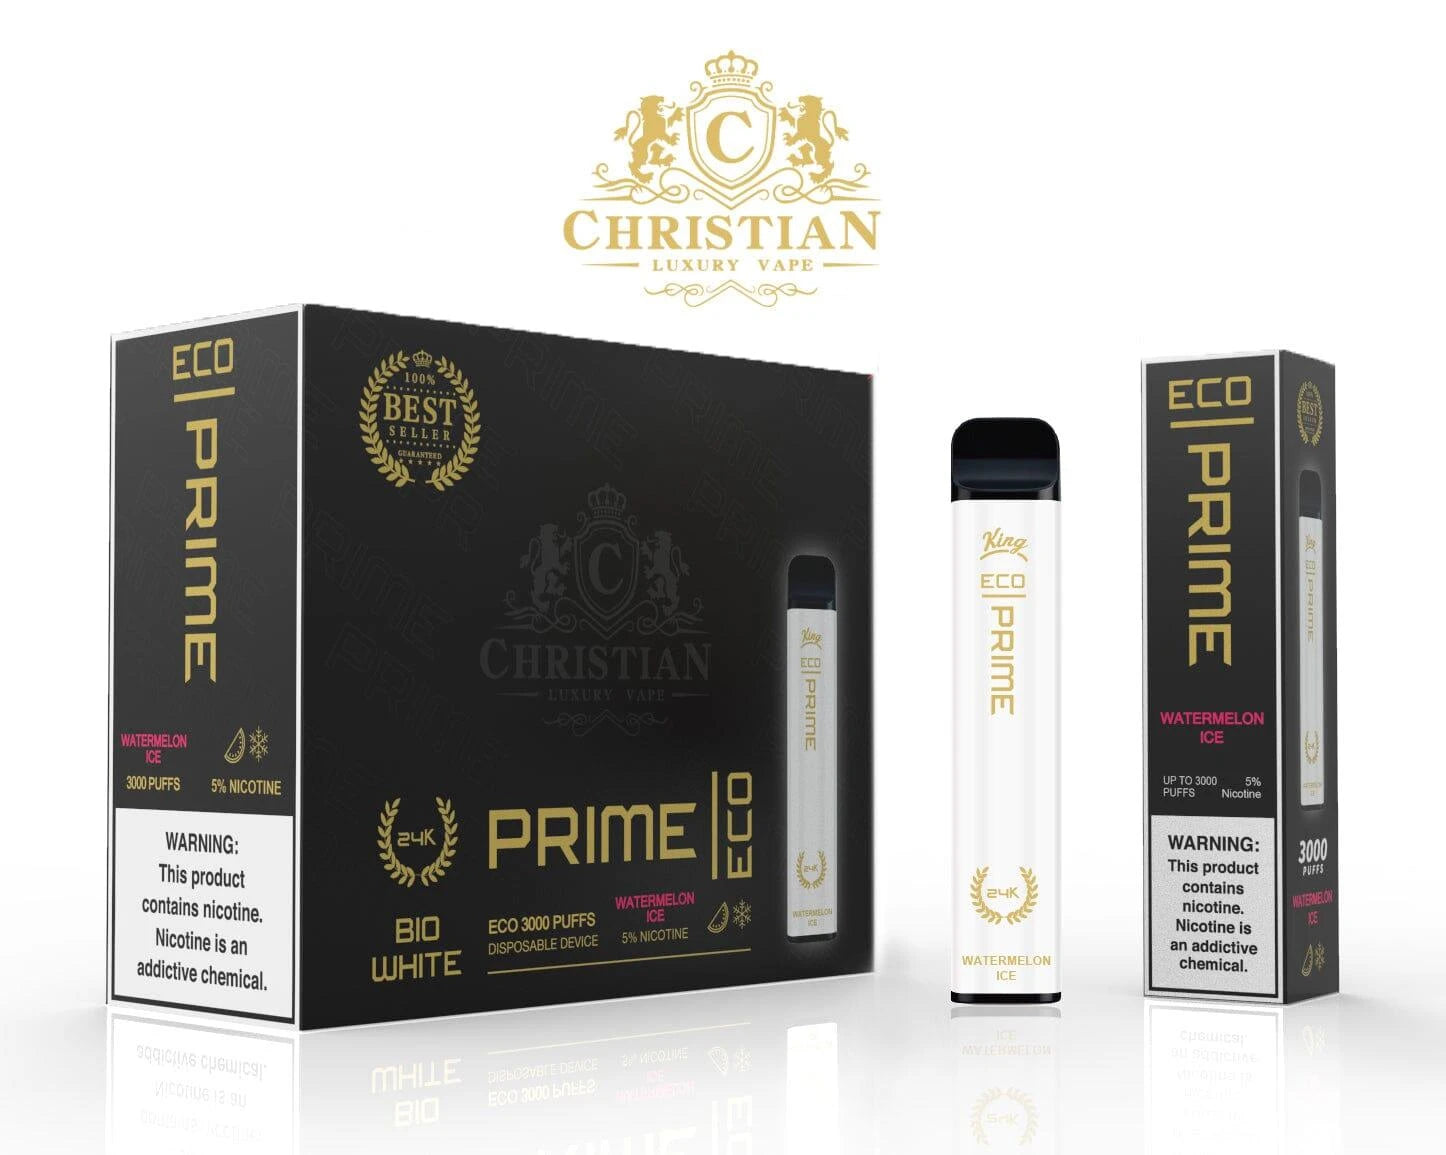 Eco Prime 3000 Puffs Disposable Vape - 6 Pack